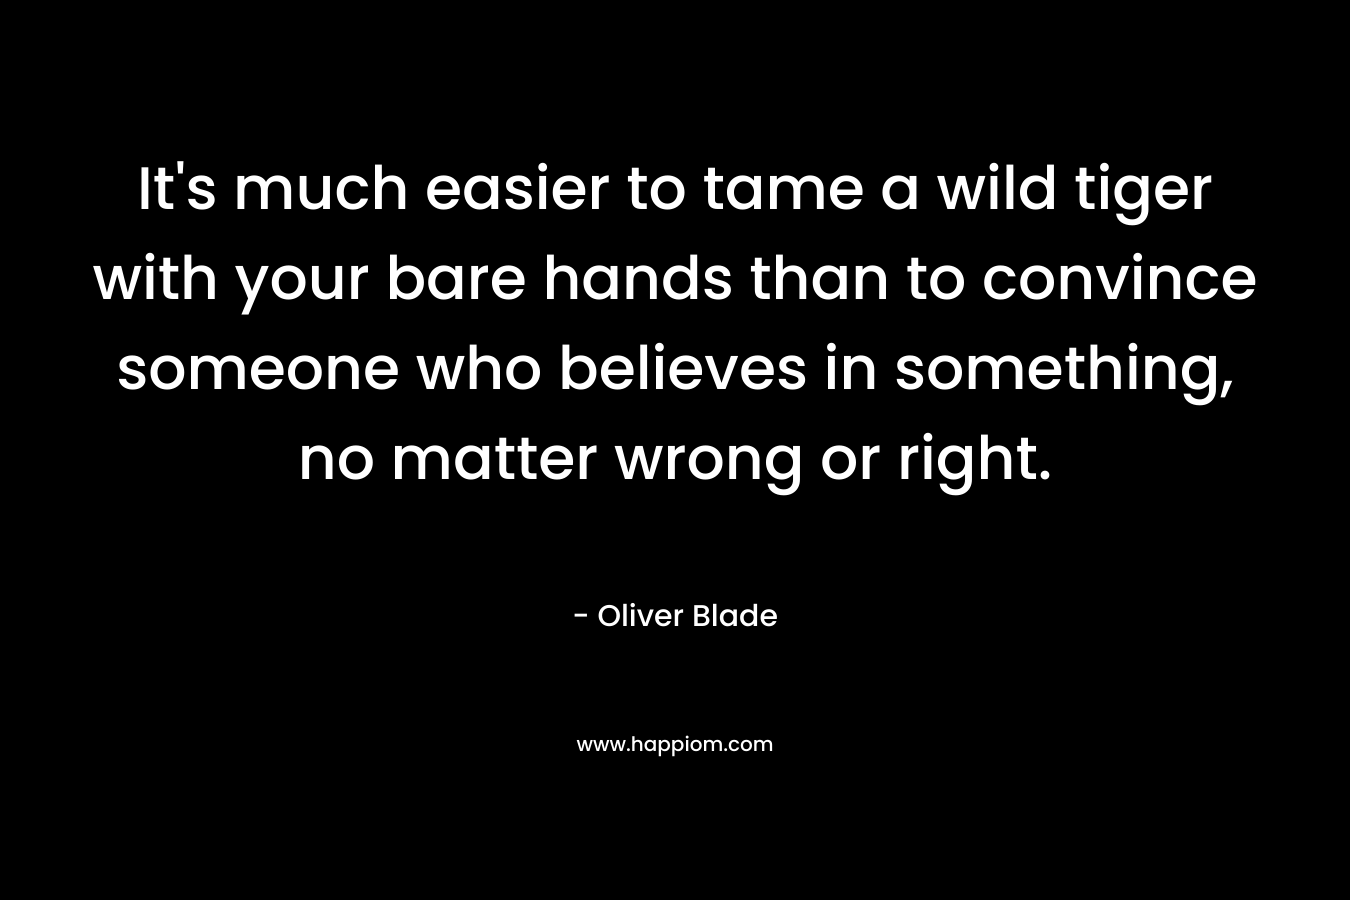 It's much easier to tame a wild tiger with your bare hands than to convince someone who believes in something, no matter wrong or right.